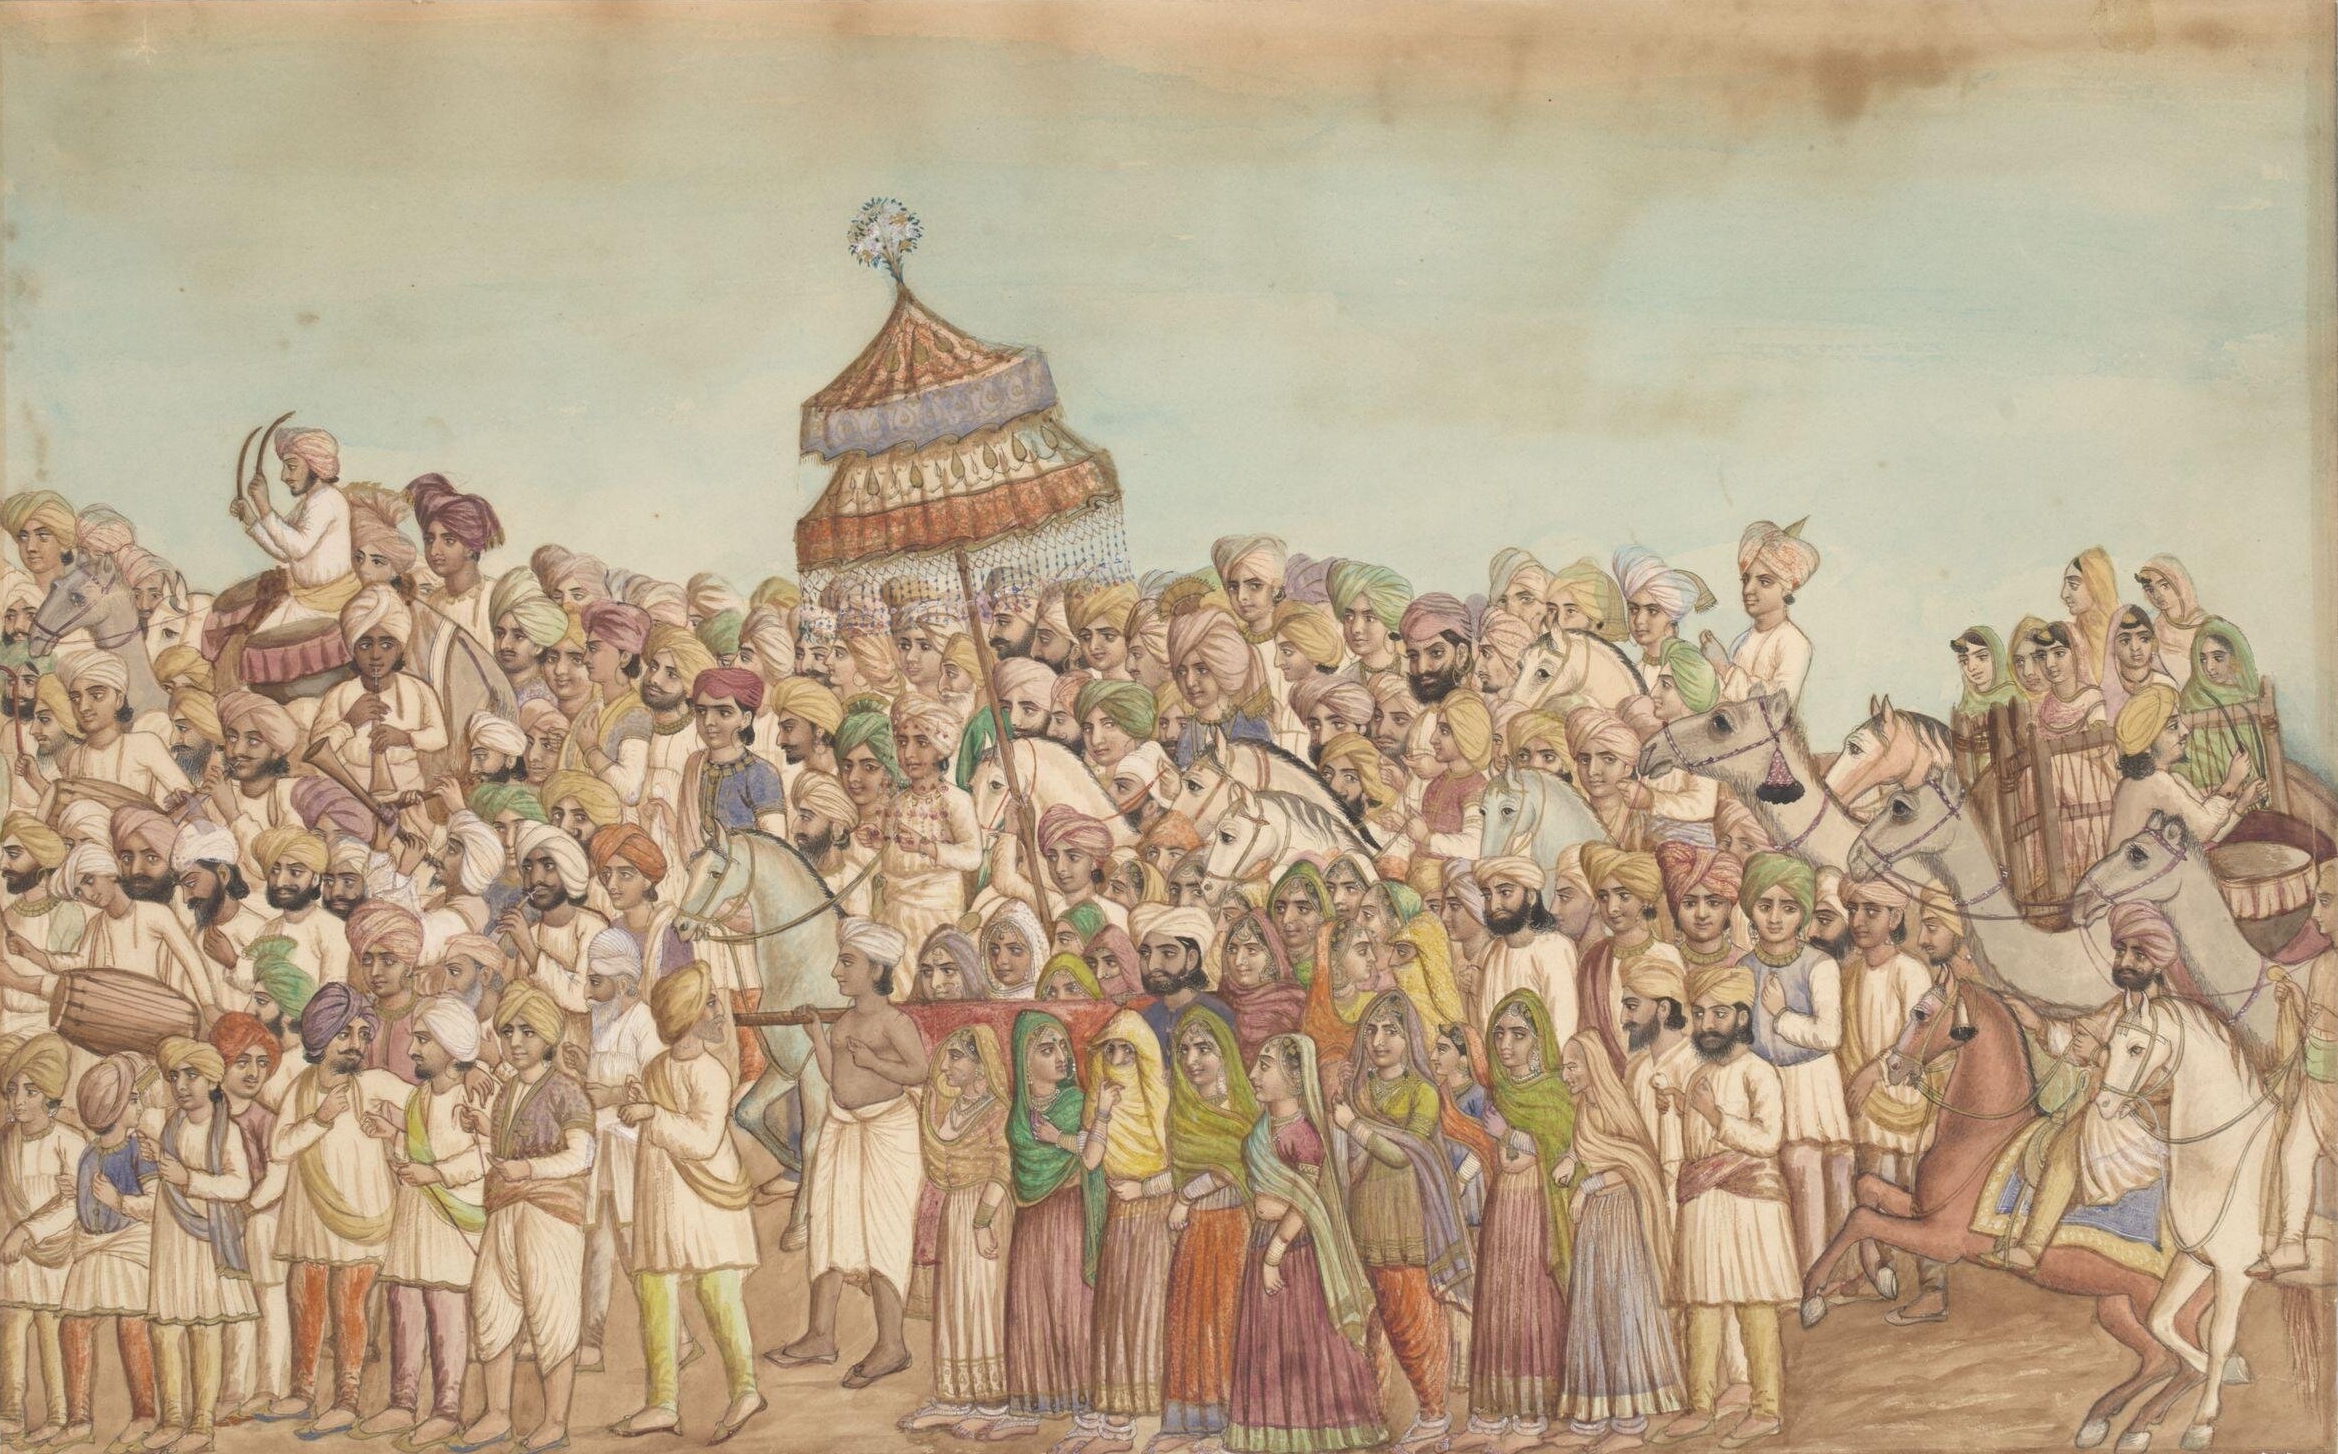 Indian Sikh Wedding (Marriage) Procession, Punjab, India | Rare & Old Vintage Paintings (1860)